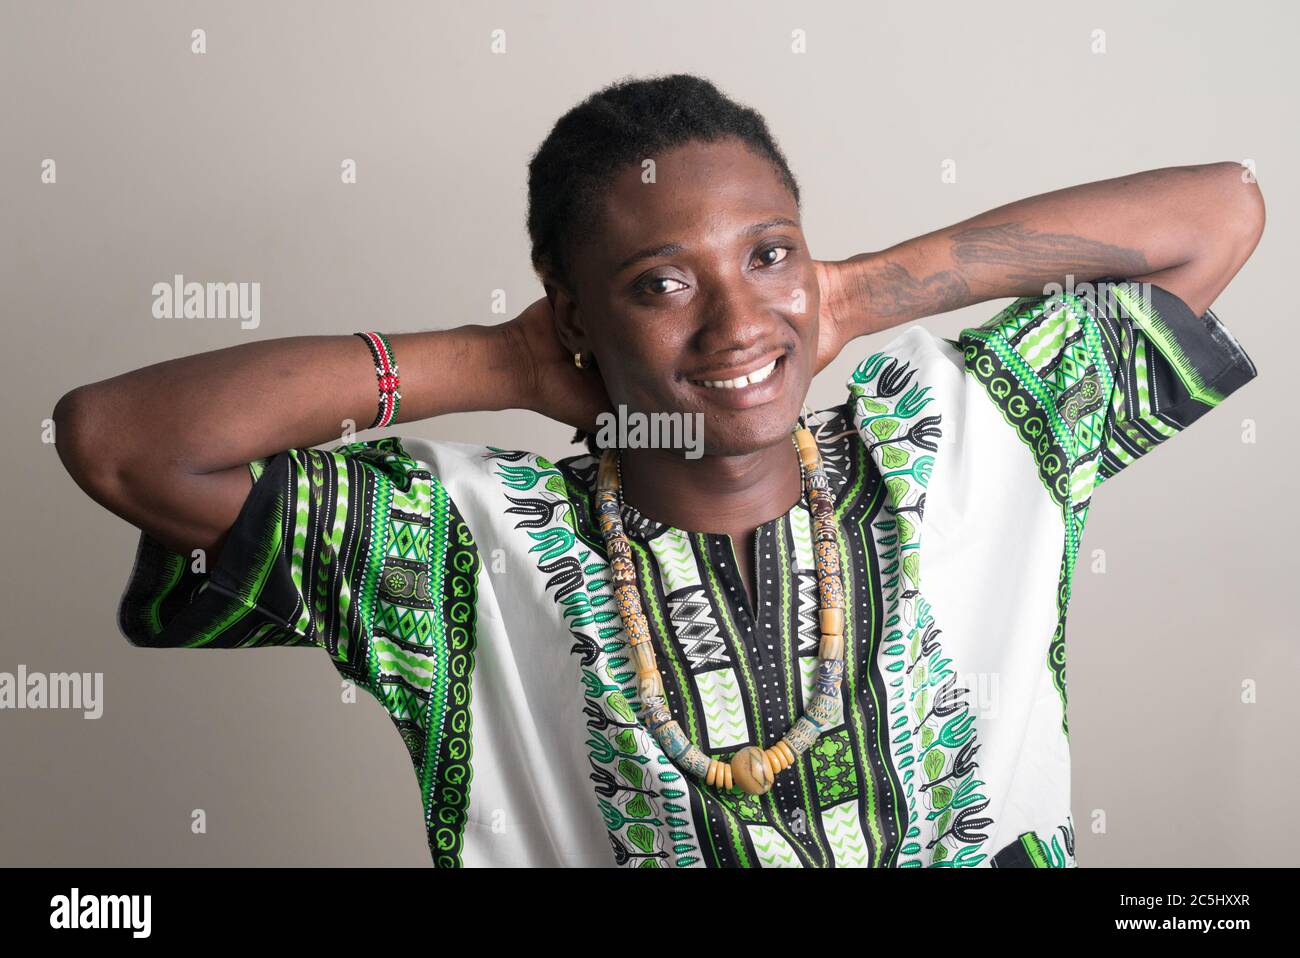 Happy young handsome African man with dreadlocks in traditional clothing Stock Photo